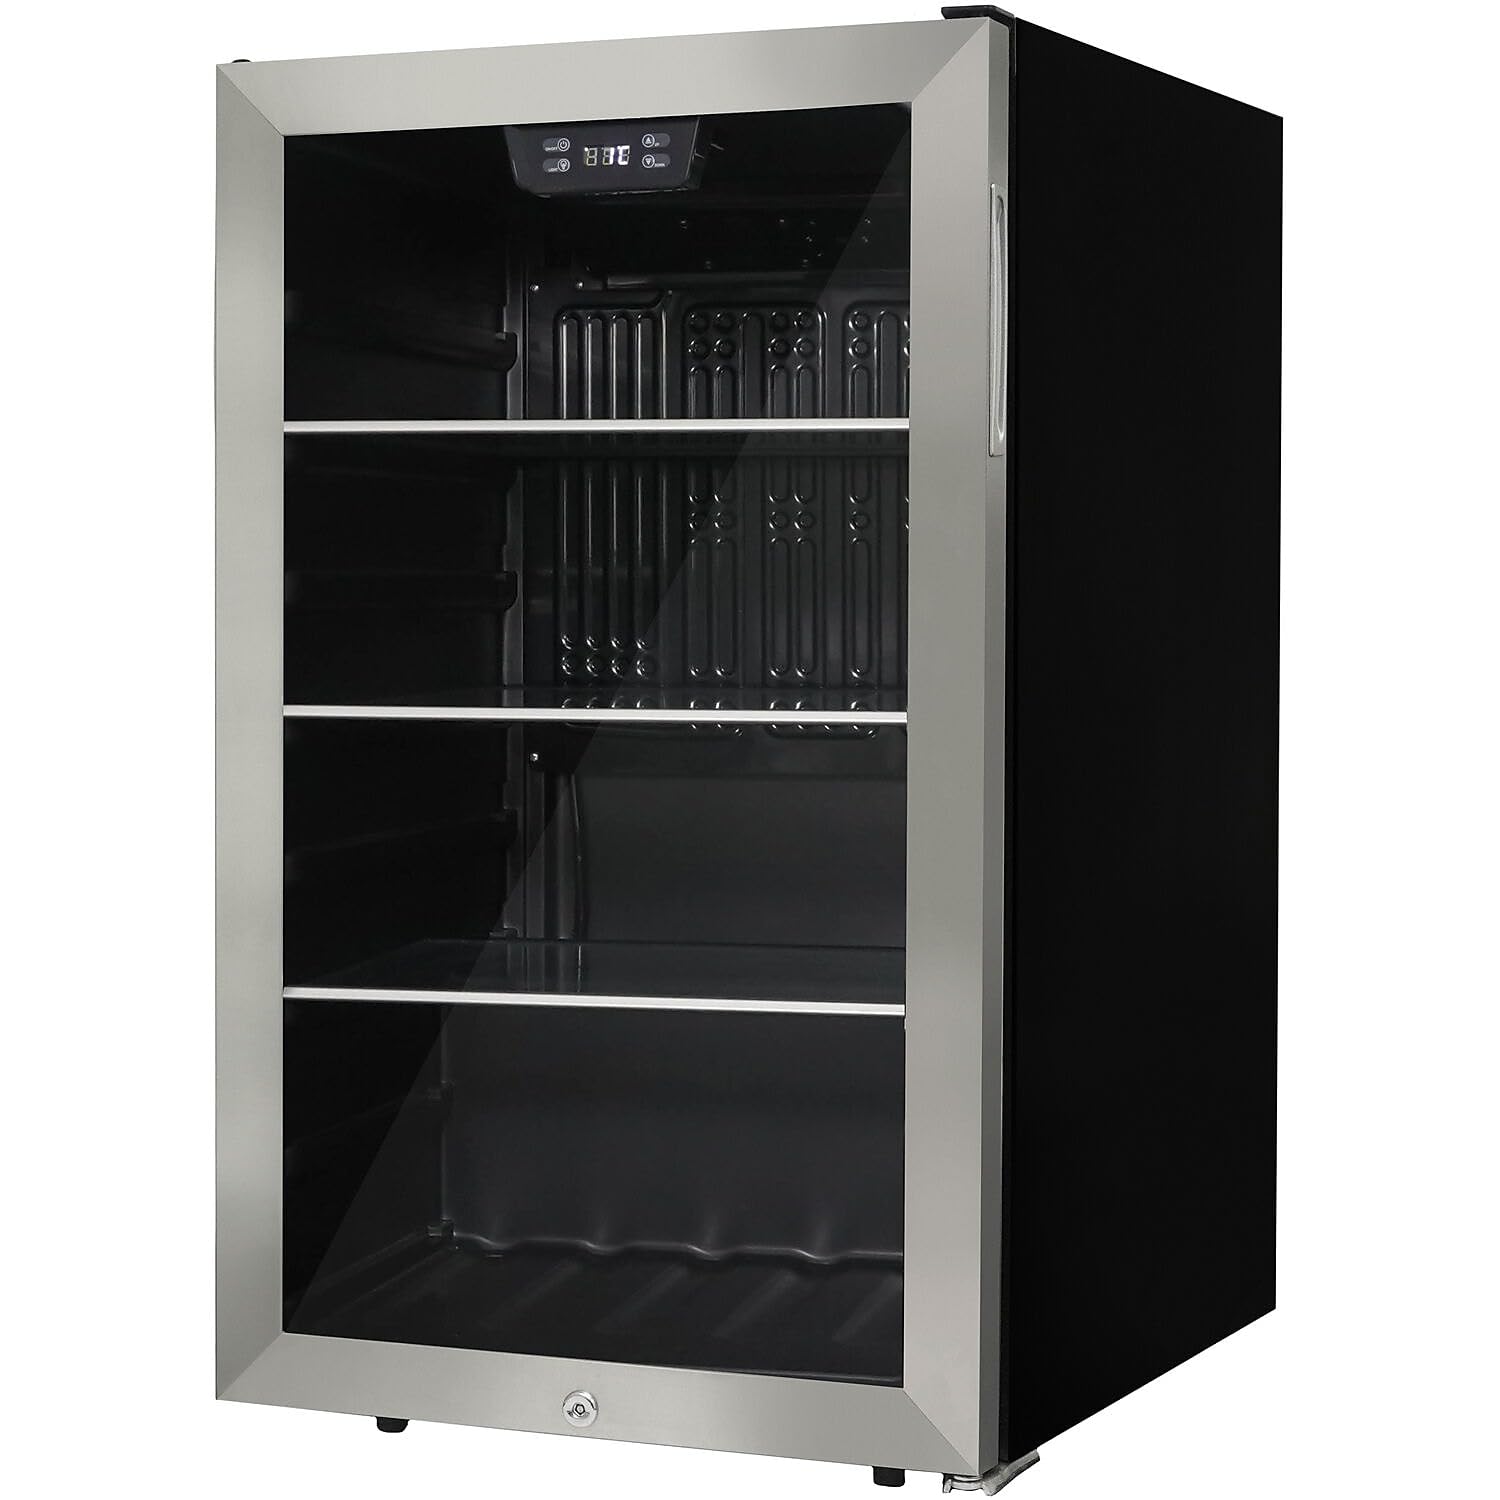 Danby 4.5-Cu. Ft. Beverage Center with Side Mount Pocket Handle, Door Lock, Black/Stainless (DBC045L1SS)